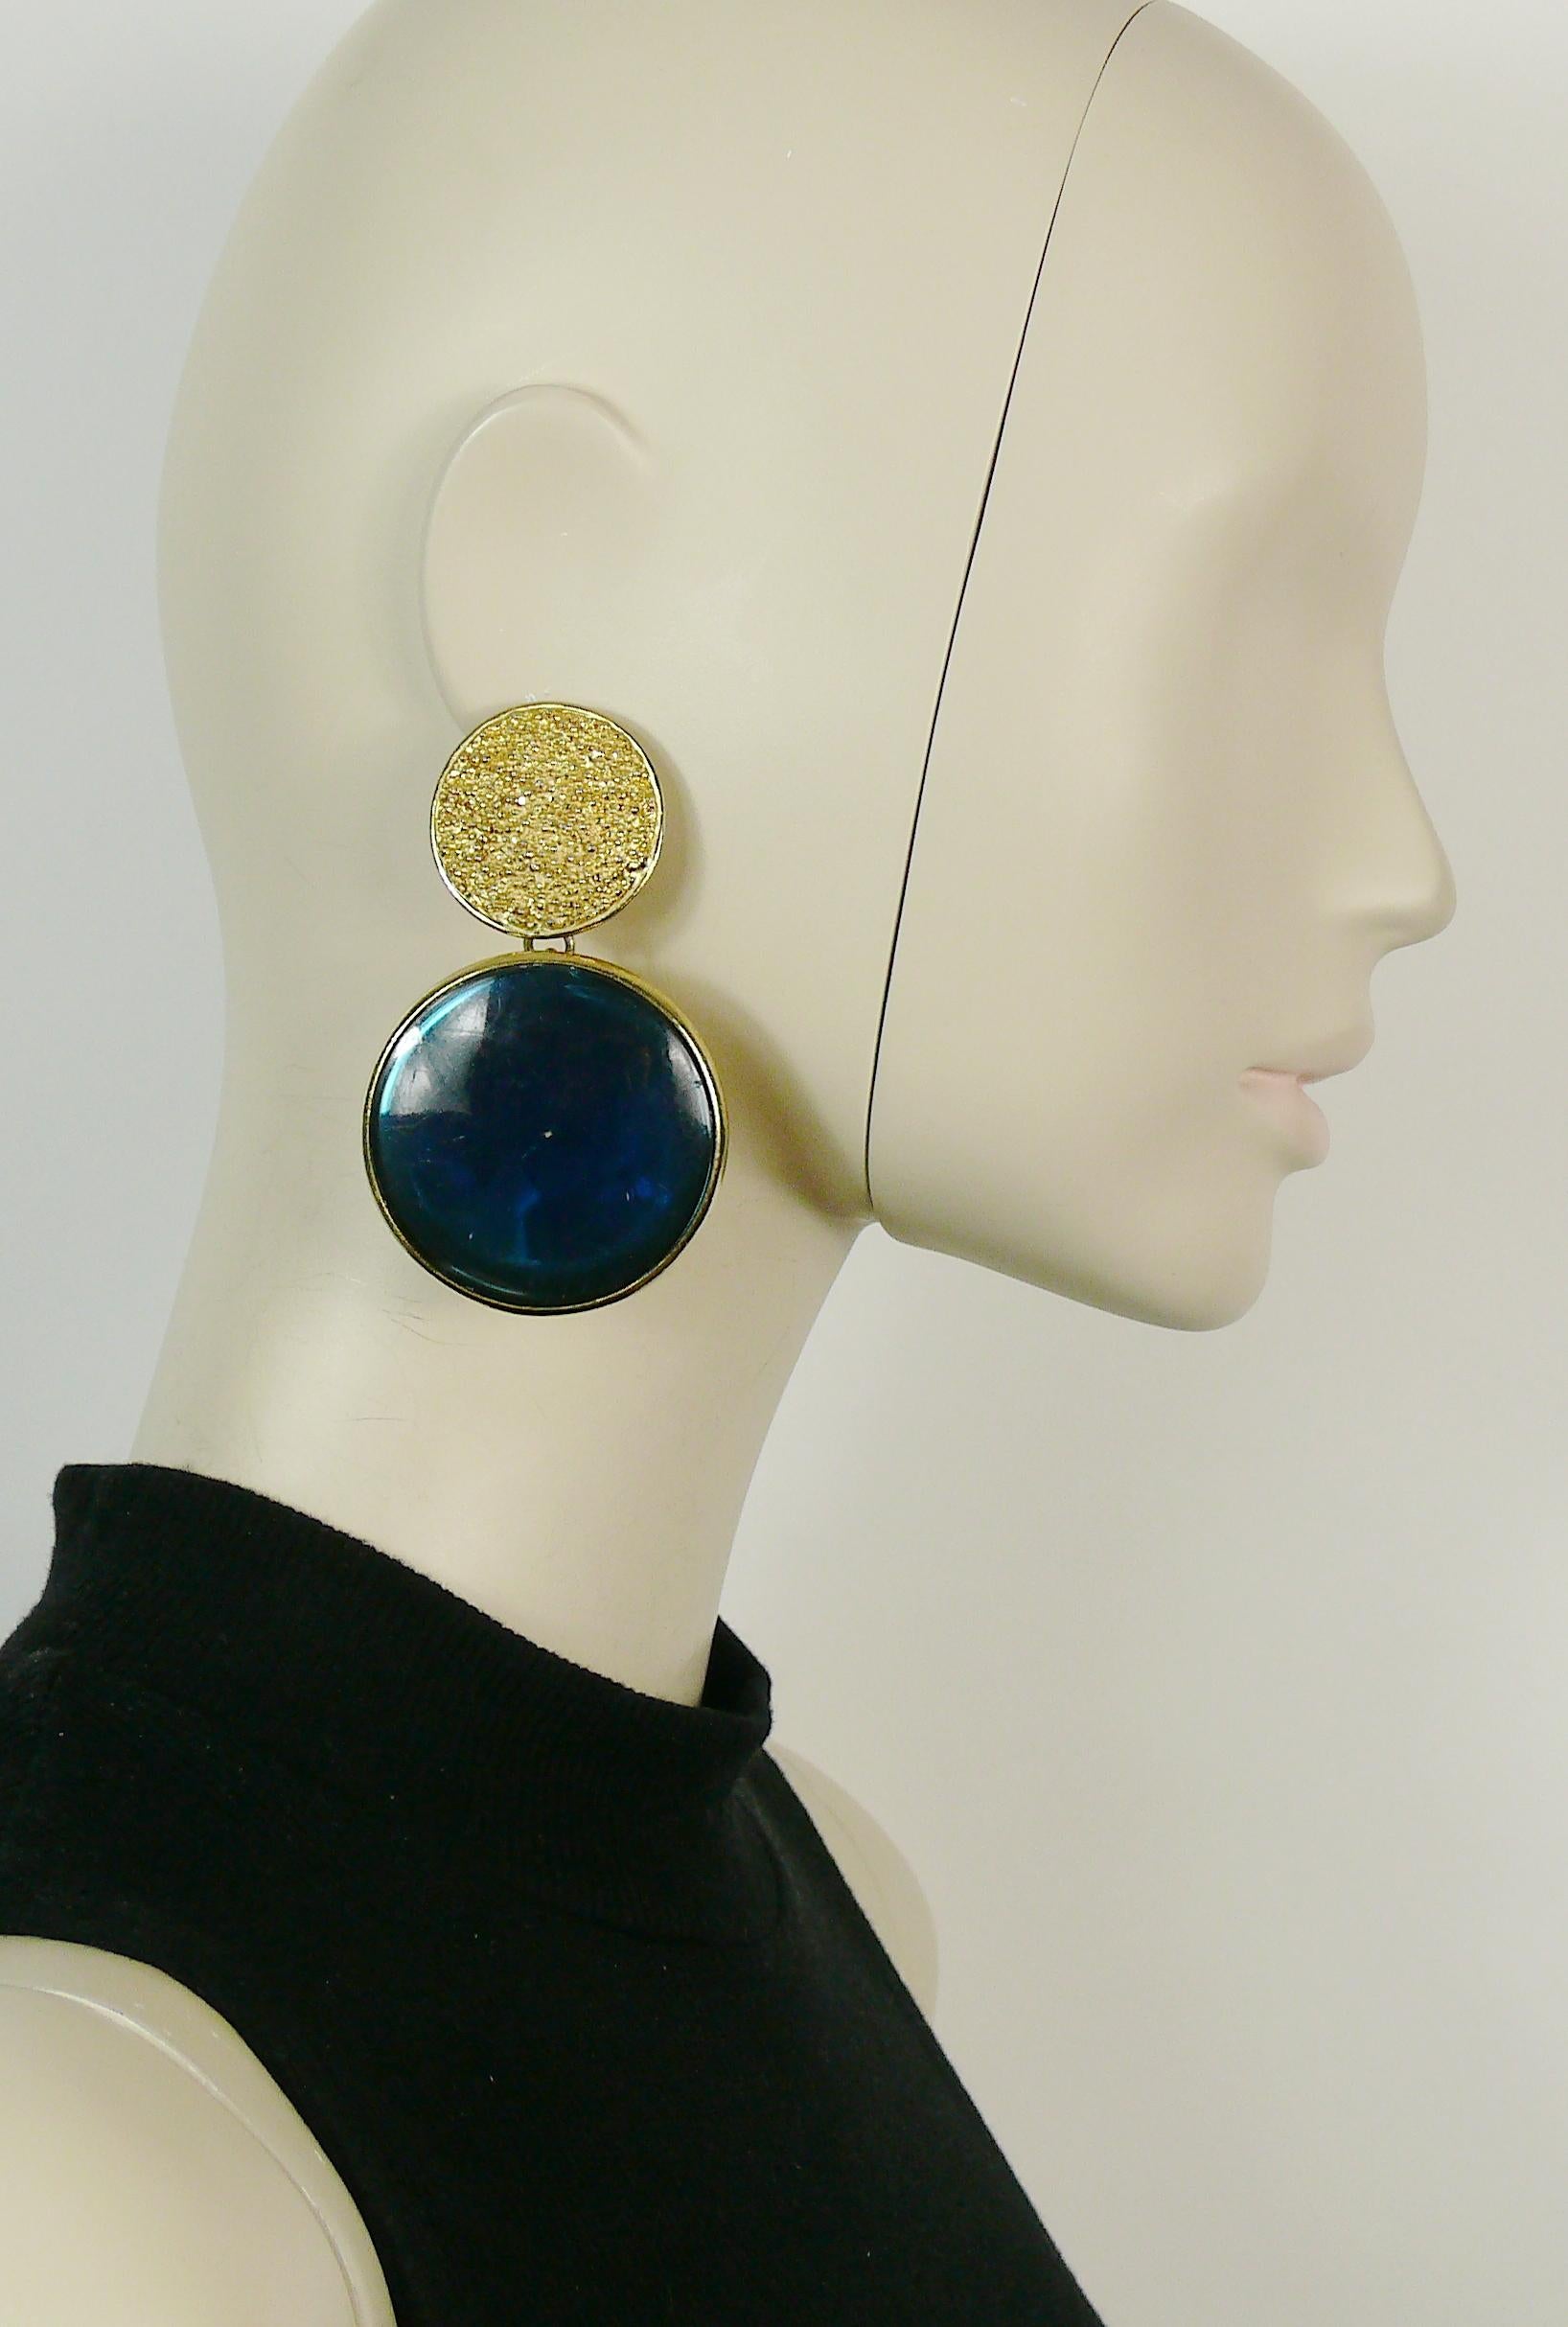 YVES SAINT LAURENT vintage massive dangling earrings (clip-on) featuring a textured gold toned top and blue resin disc.

Embossed YSL Made in France.

Indicative measurements : height approx. 8.2 cm (3.23 inches) / max. diameter approx. 5 cm (1.97